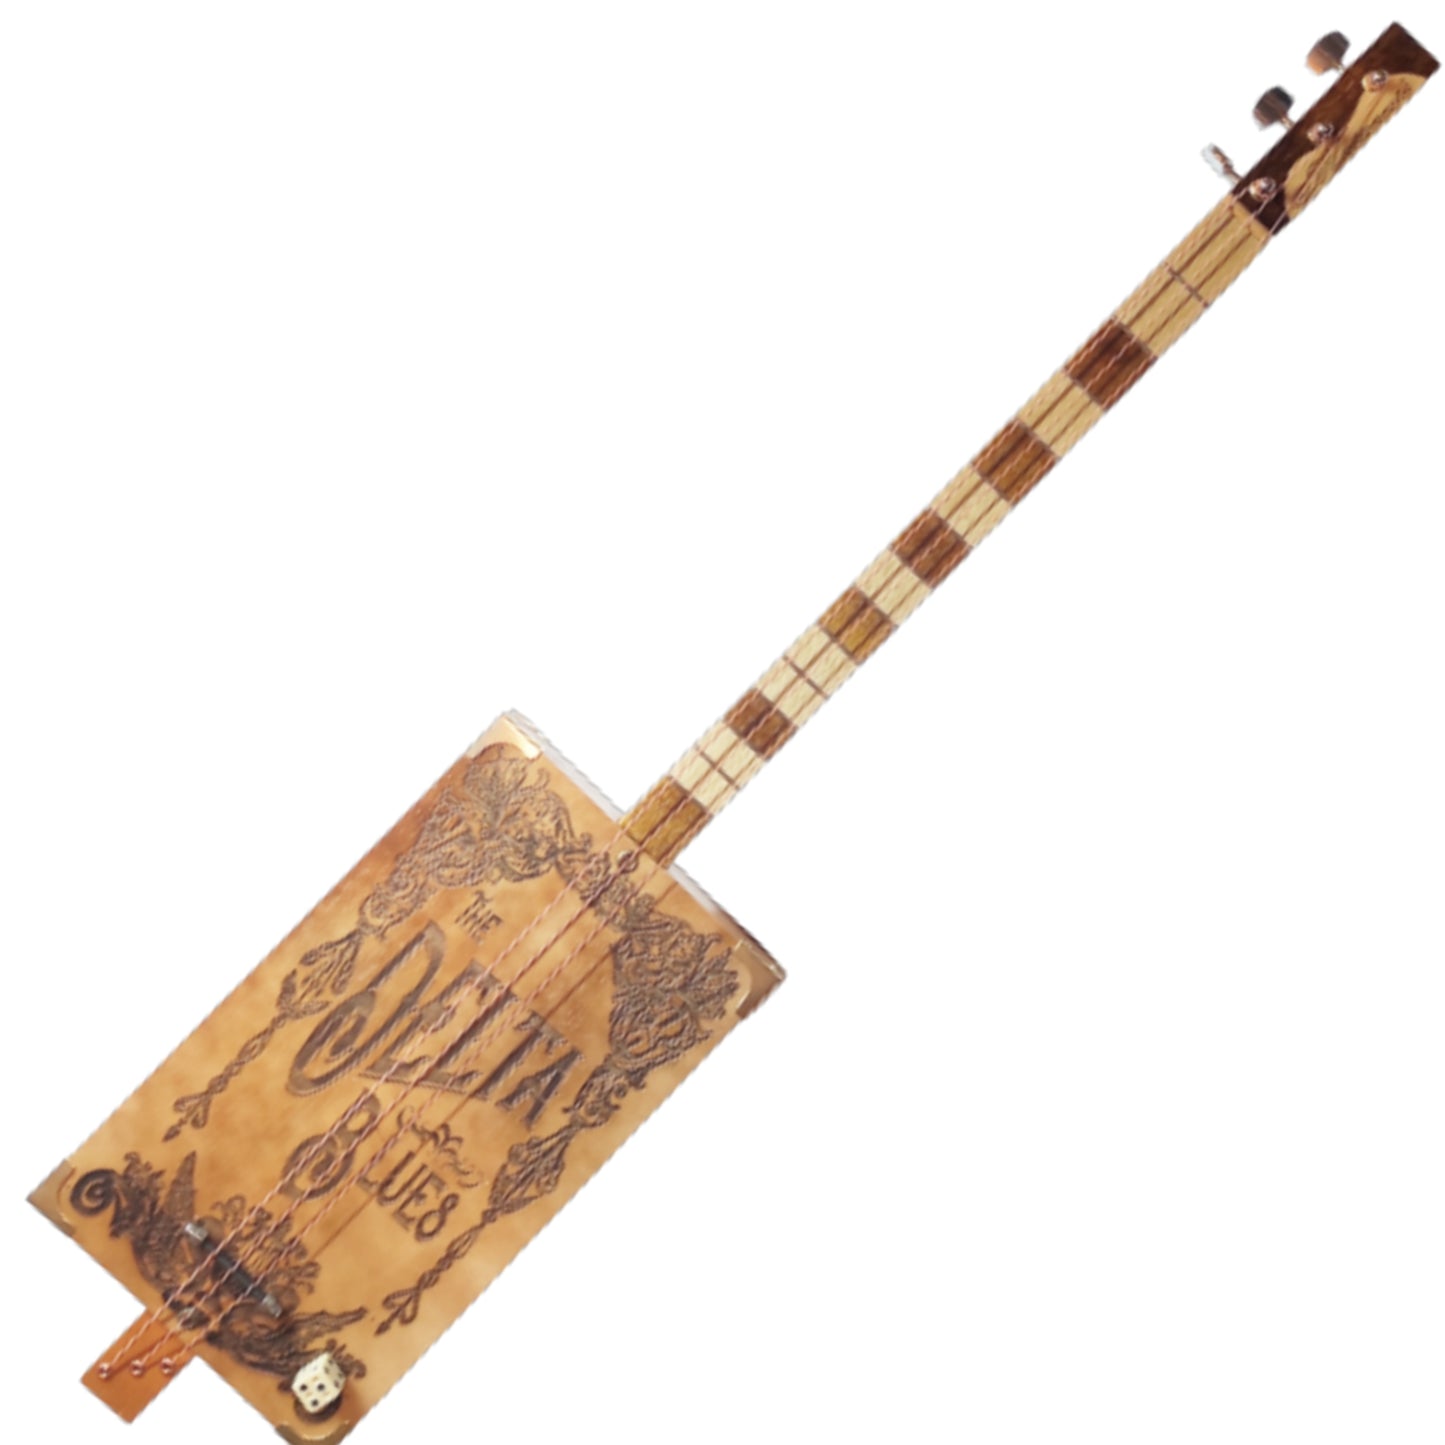 The delta blues 3tpv cigar box guitar Matteacci's Made in Italy